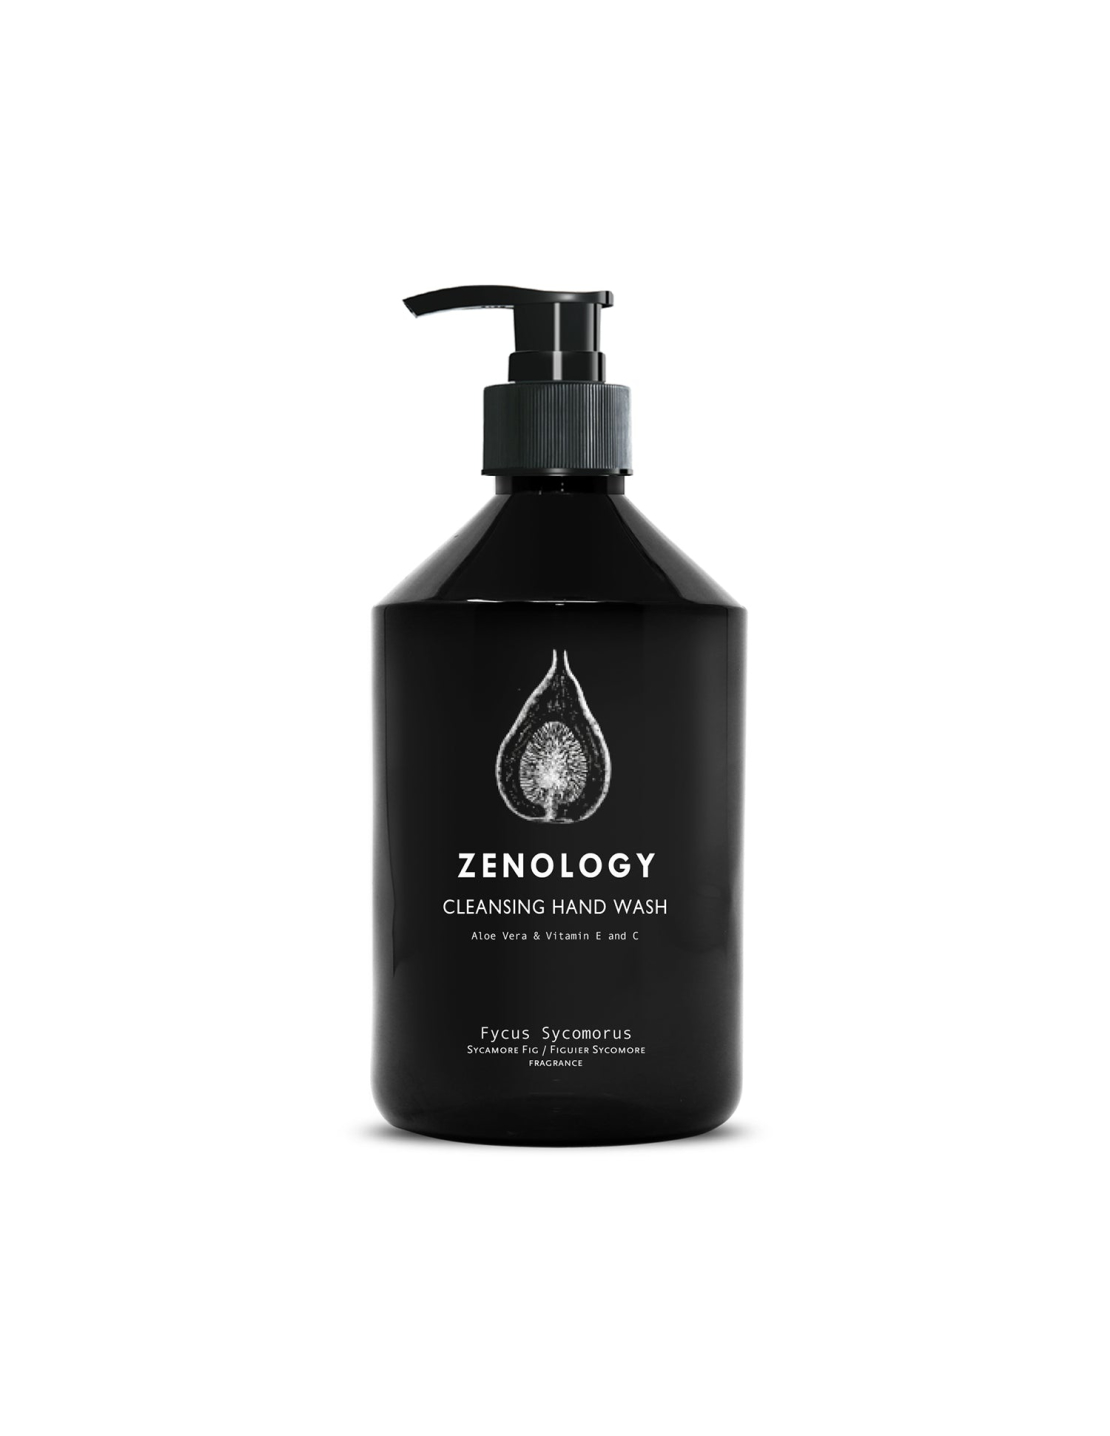 Sycamore Fig Cleansing Hand Wash